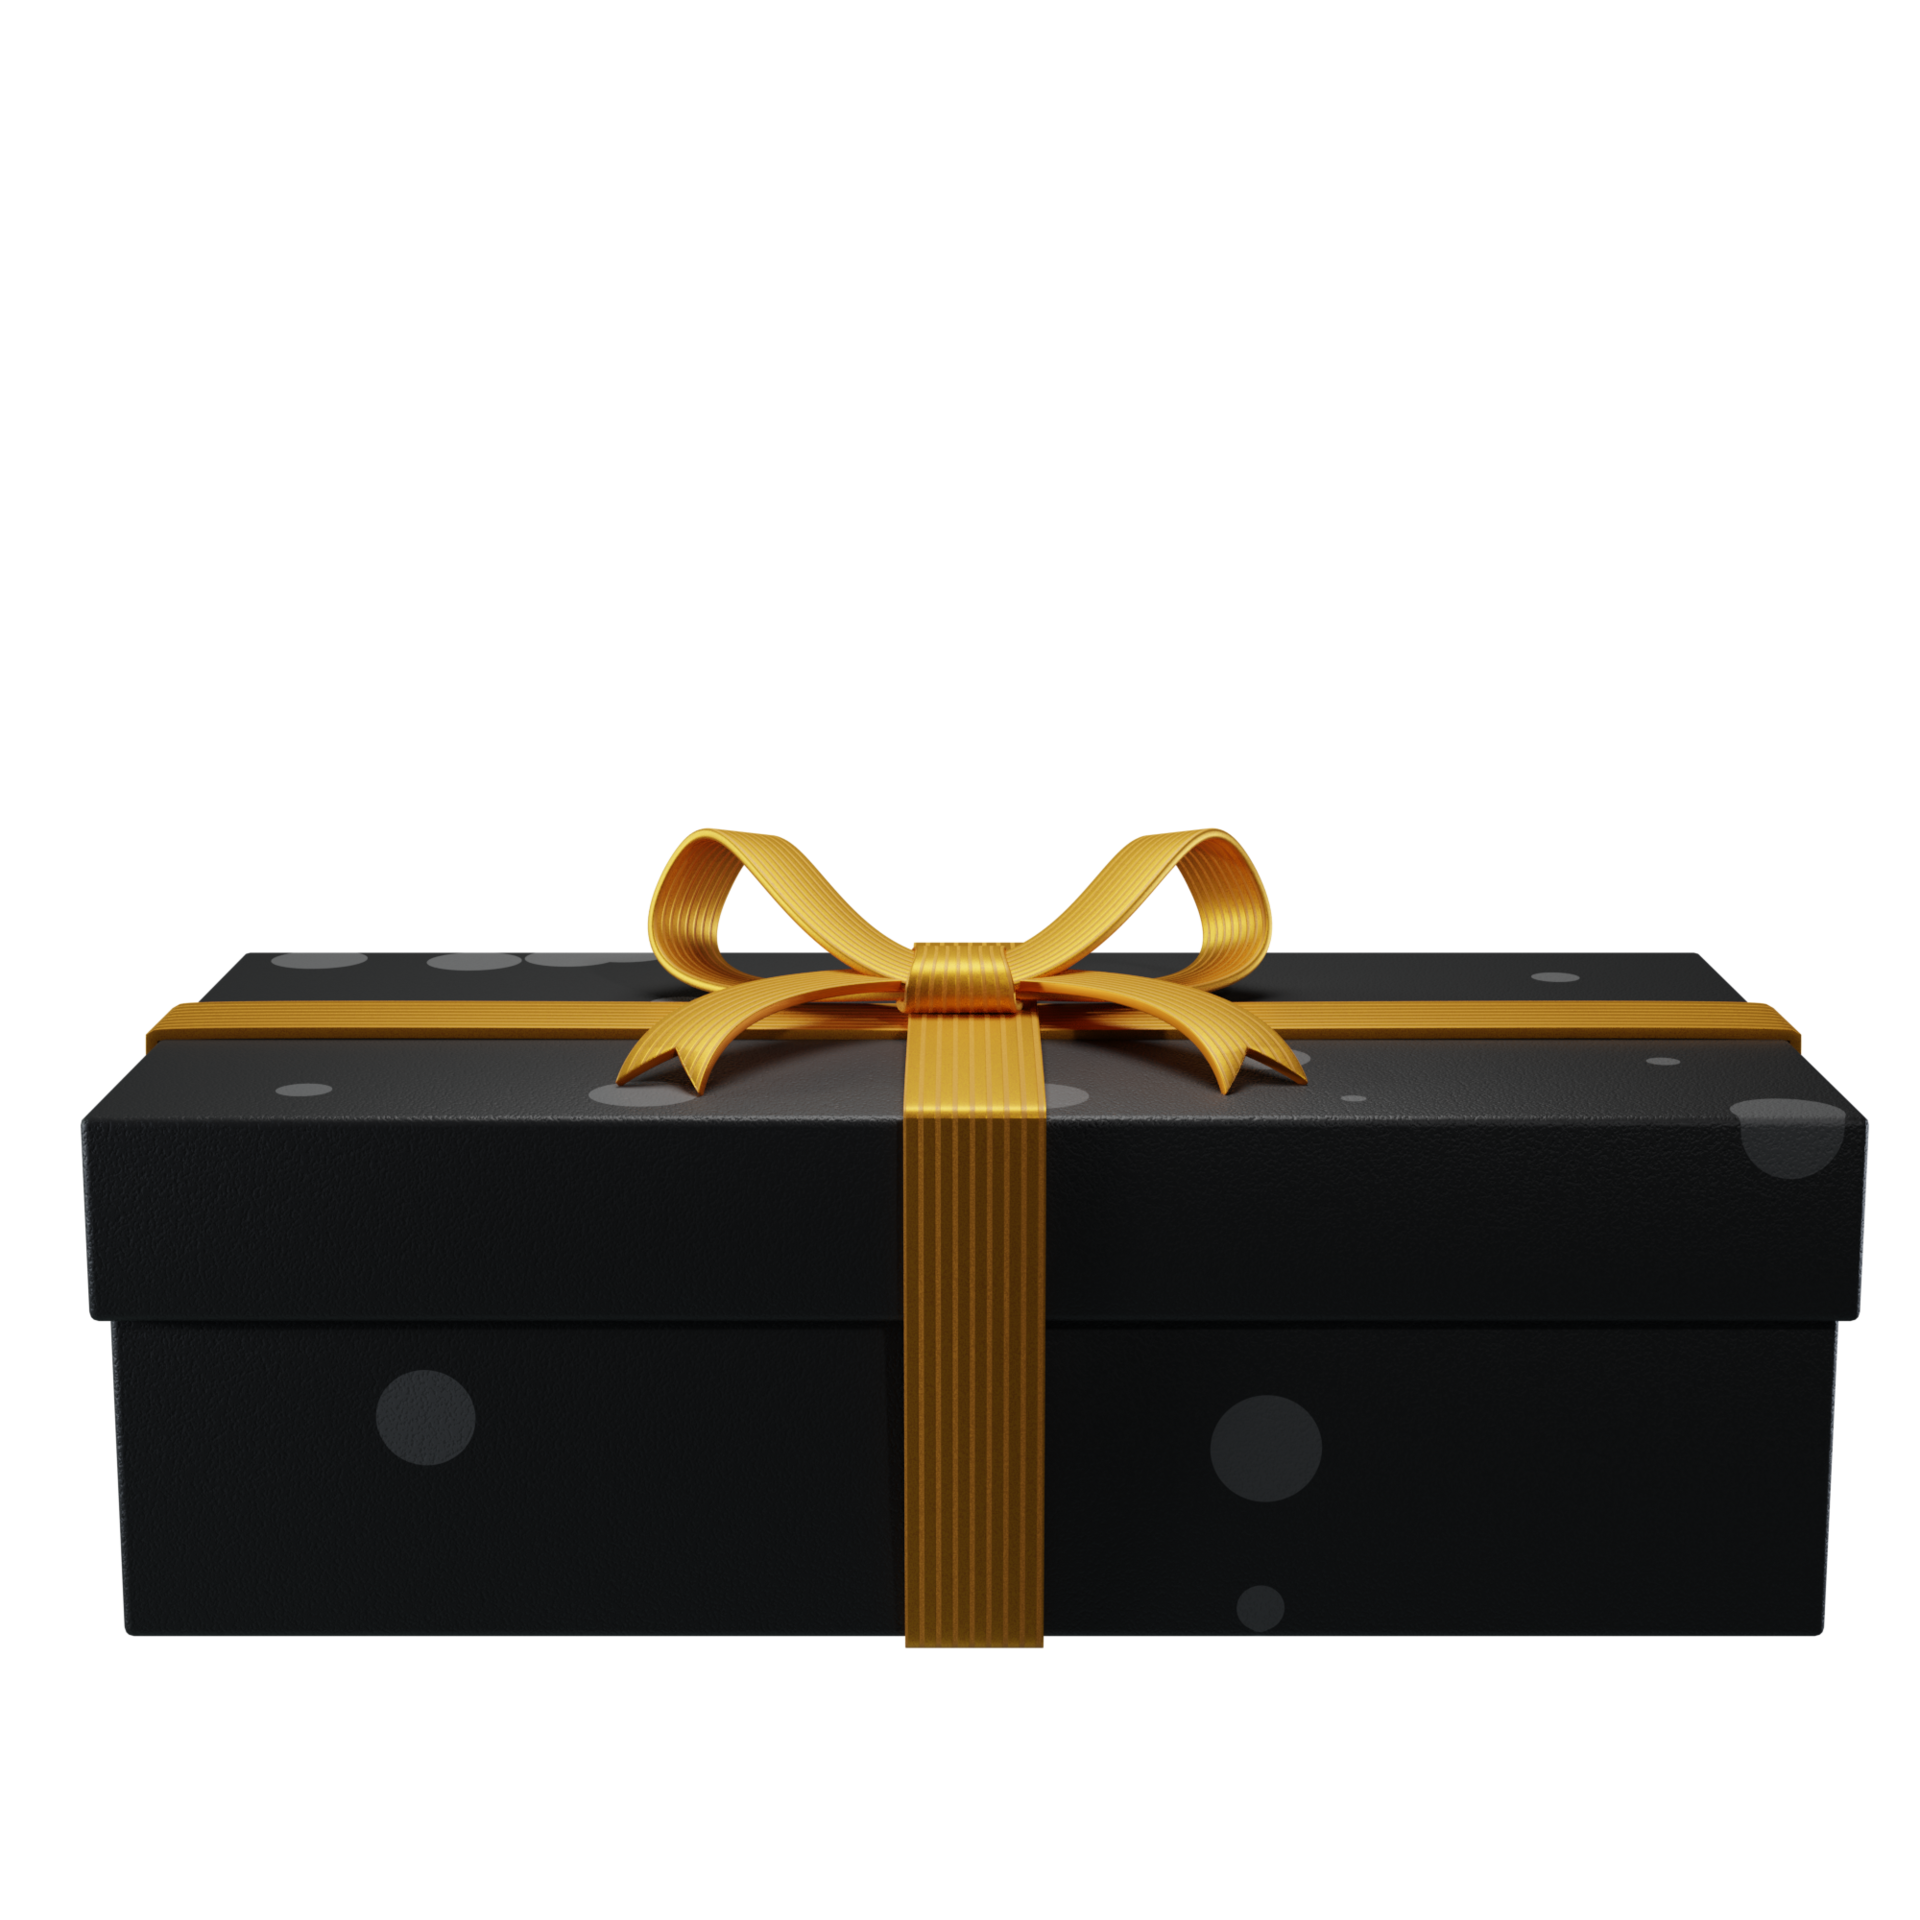 Cute Gift Box for Special Day 16326485 PNG